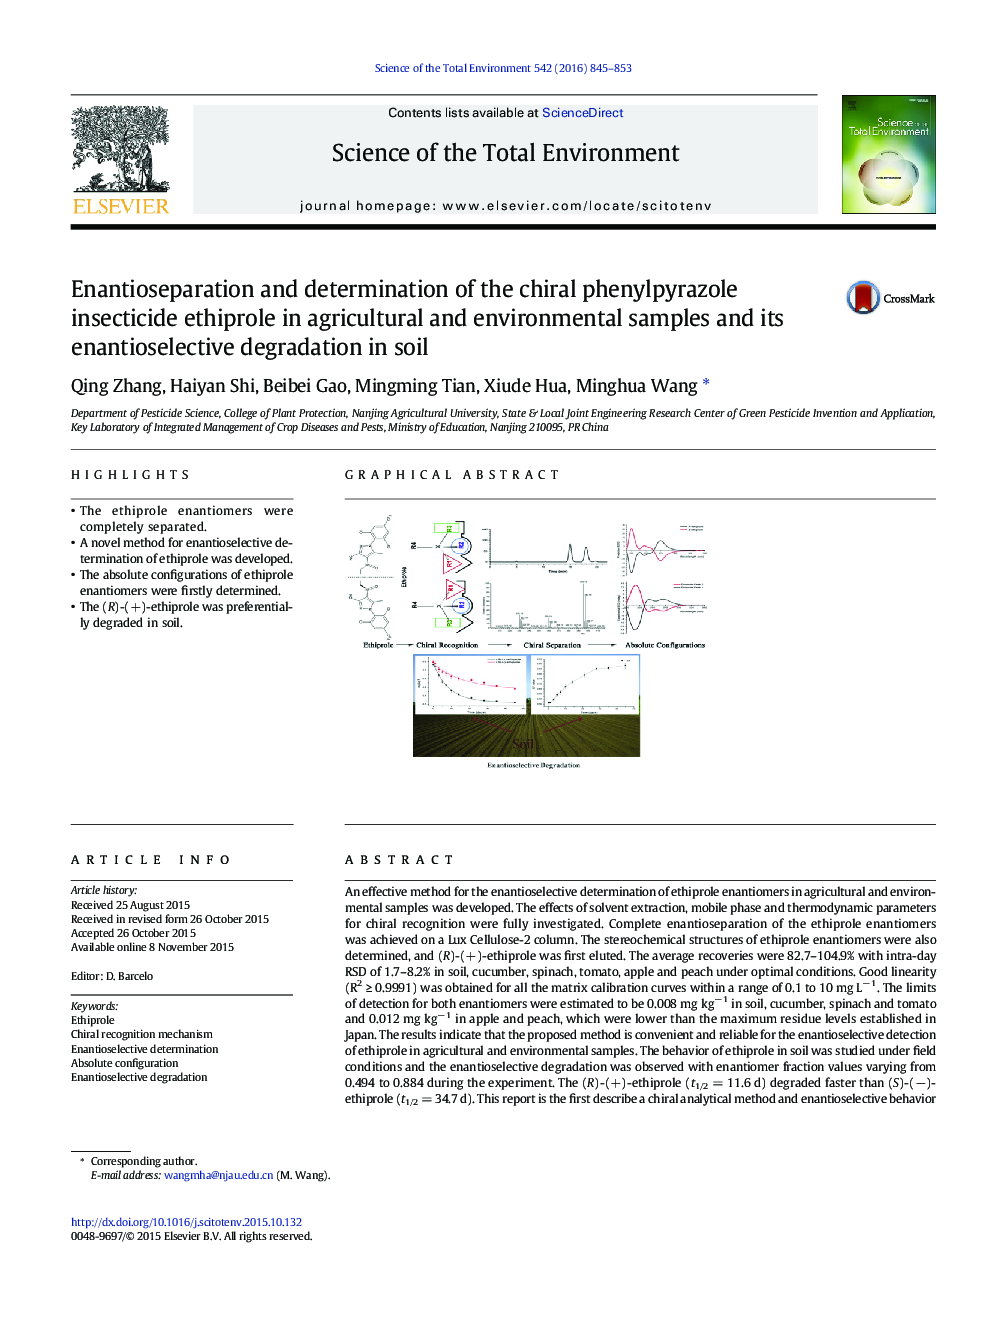 Enantioseparation and determination of the chiral phenylpyrazole insecticide ethiprole in agricultural and environmental samples and its enantioselective degradation in soil